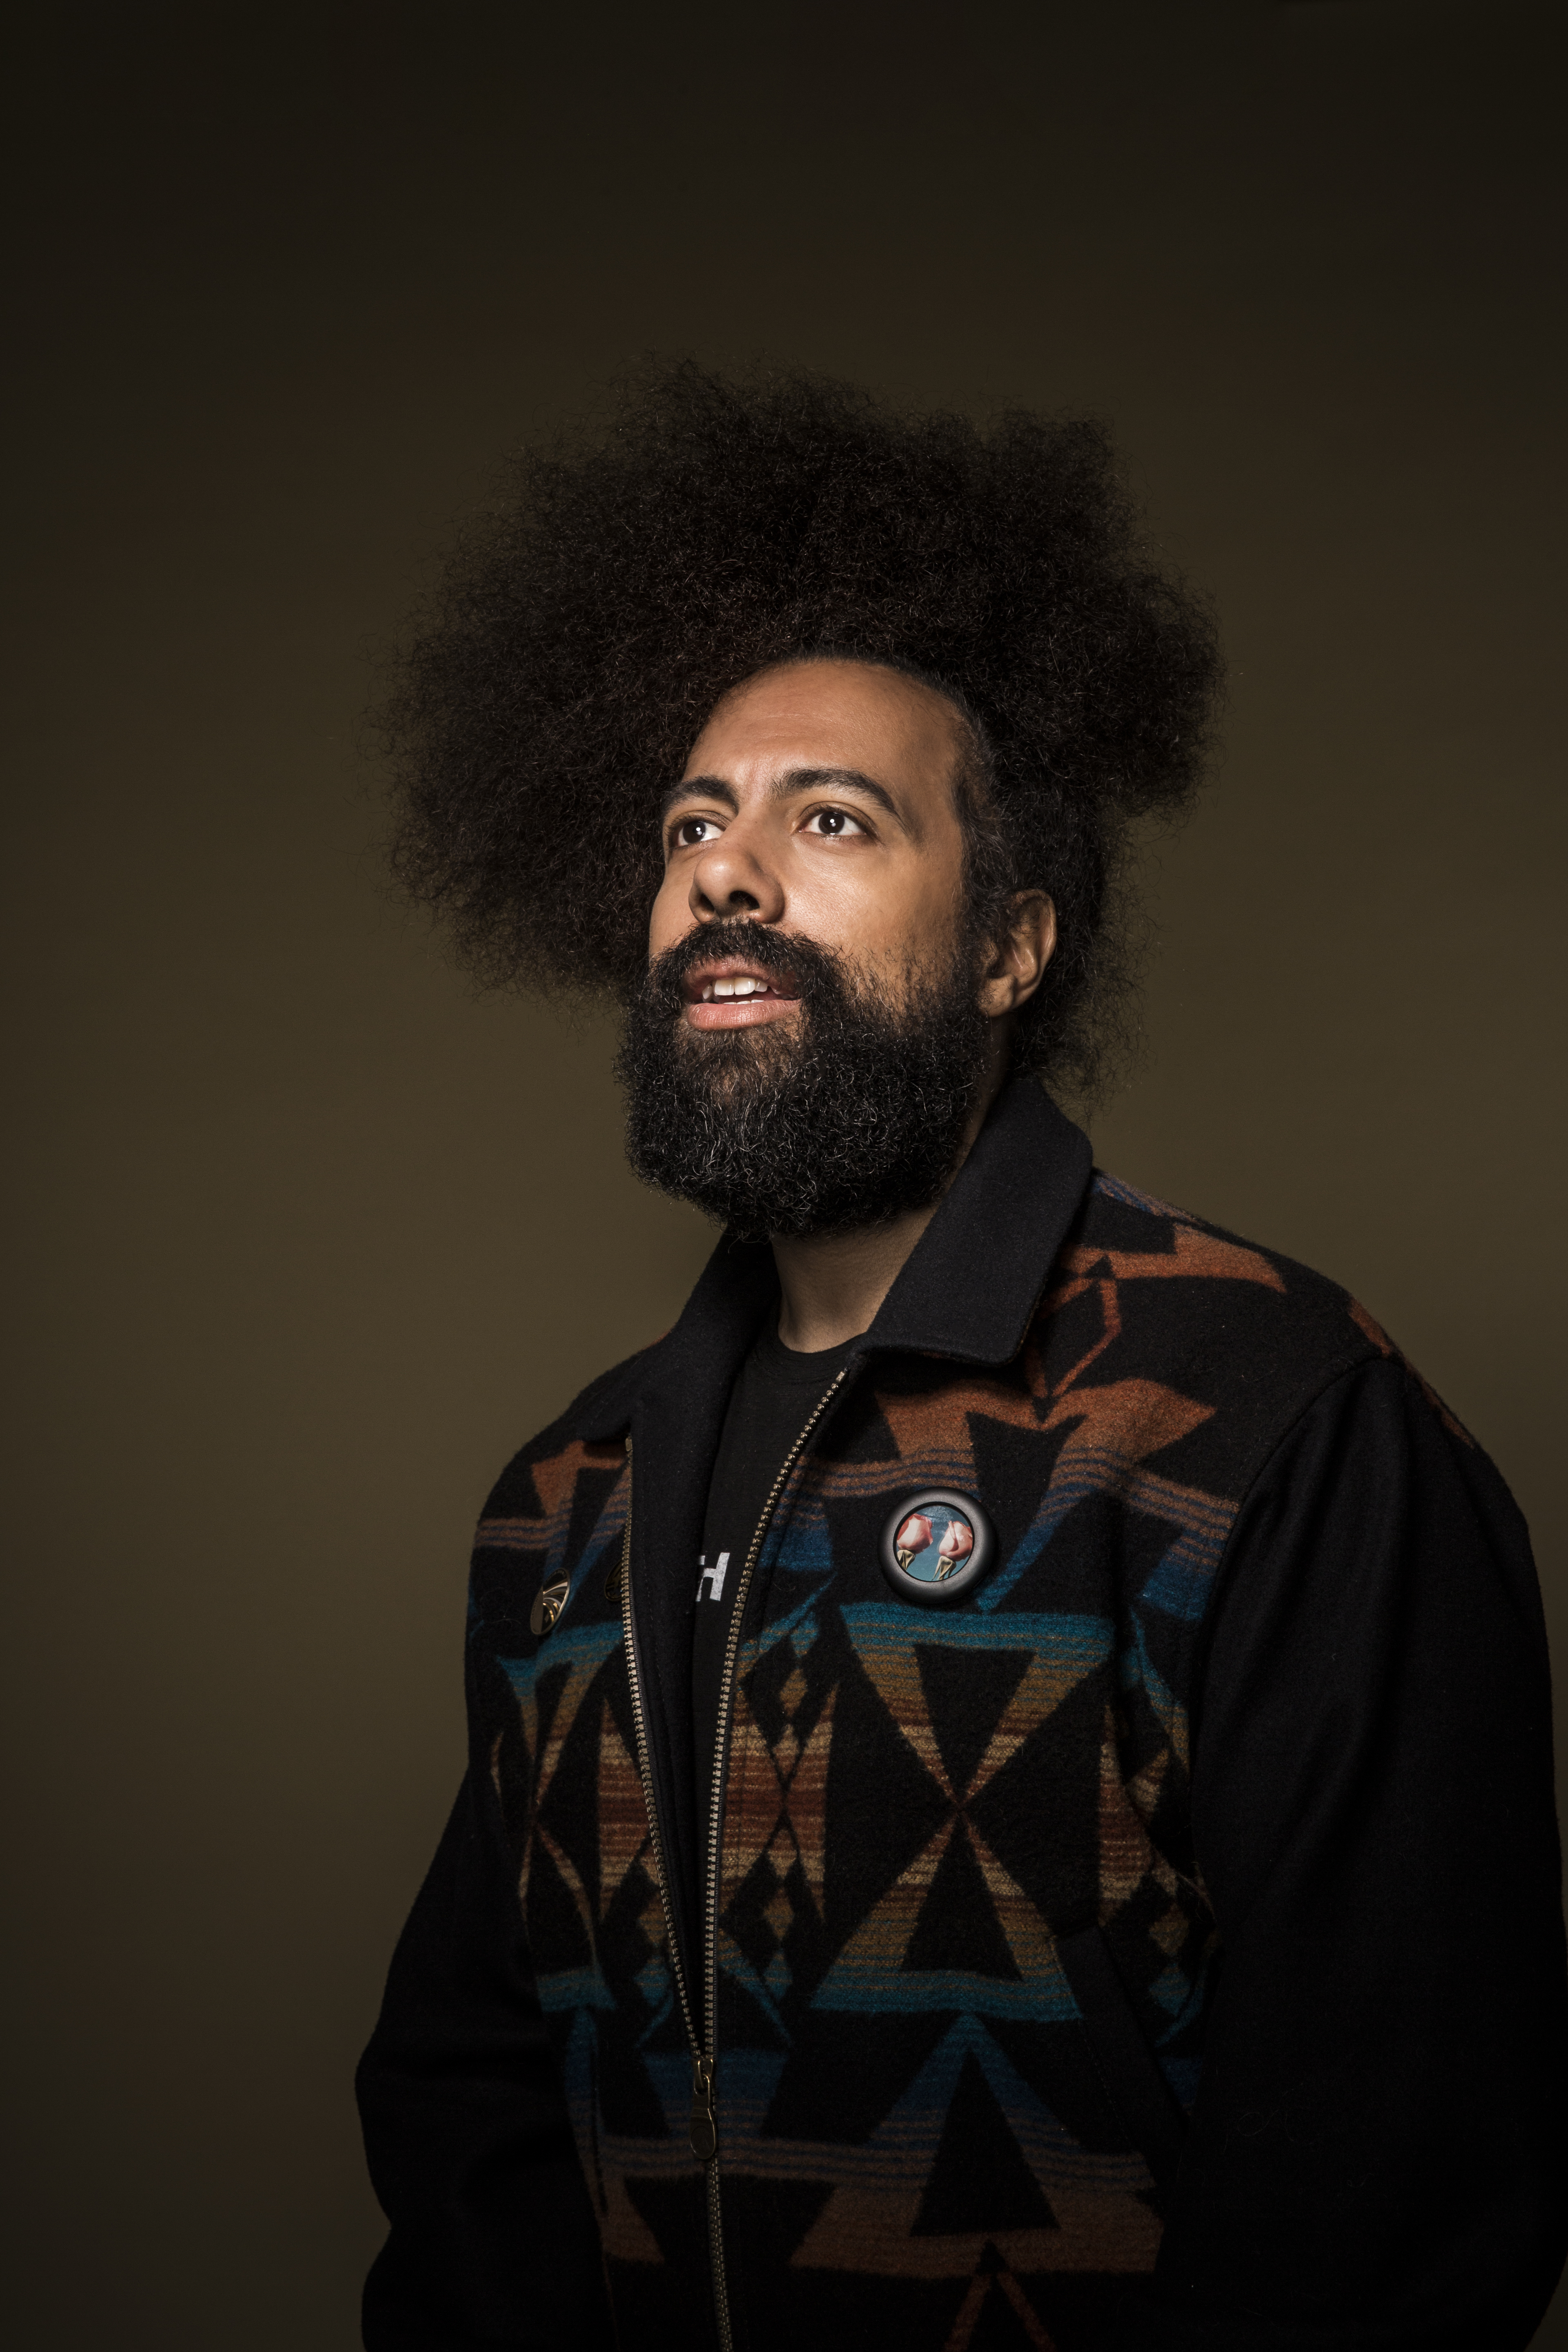 Comedian and musician Reggie Watts to perform April 5 at the University of North Texas